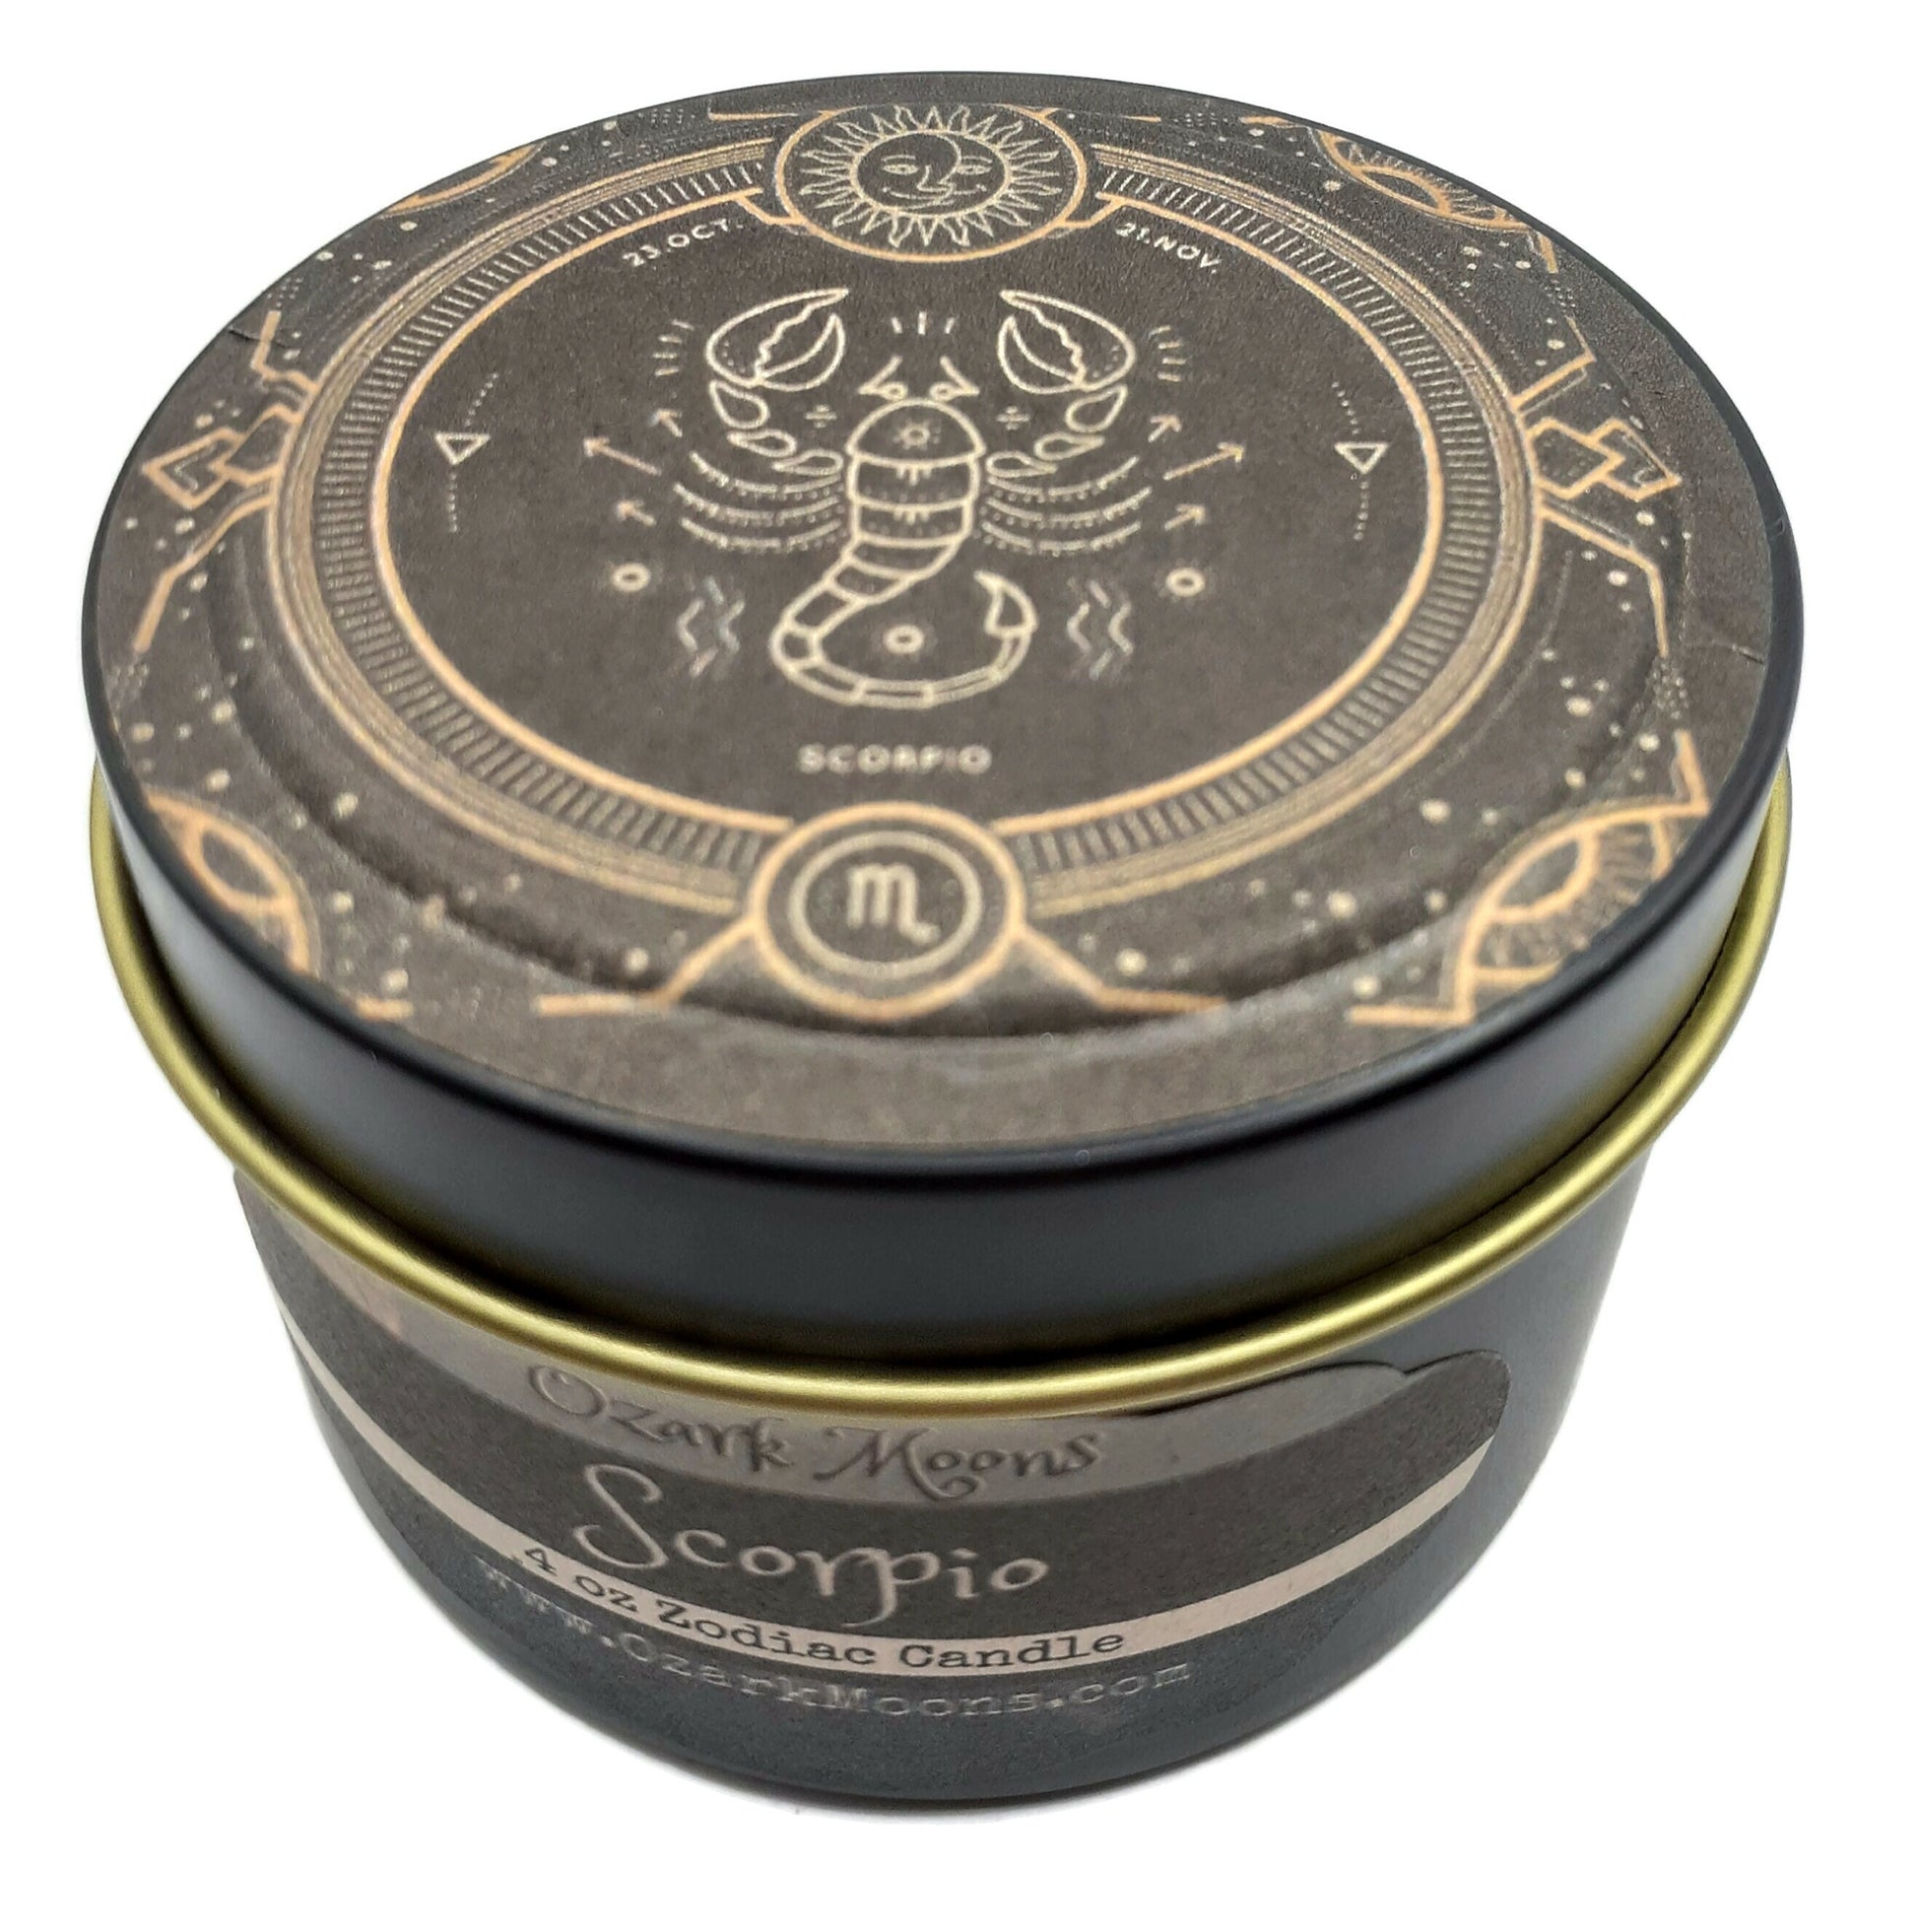 SCORPIO Zodiac Horoscope Candles or Wax Melts (Oct 23 – Nov 22) Burgundy Red with Garnet and Obsidian Chips- Musk, Cologne